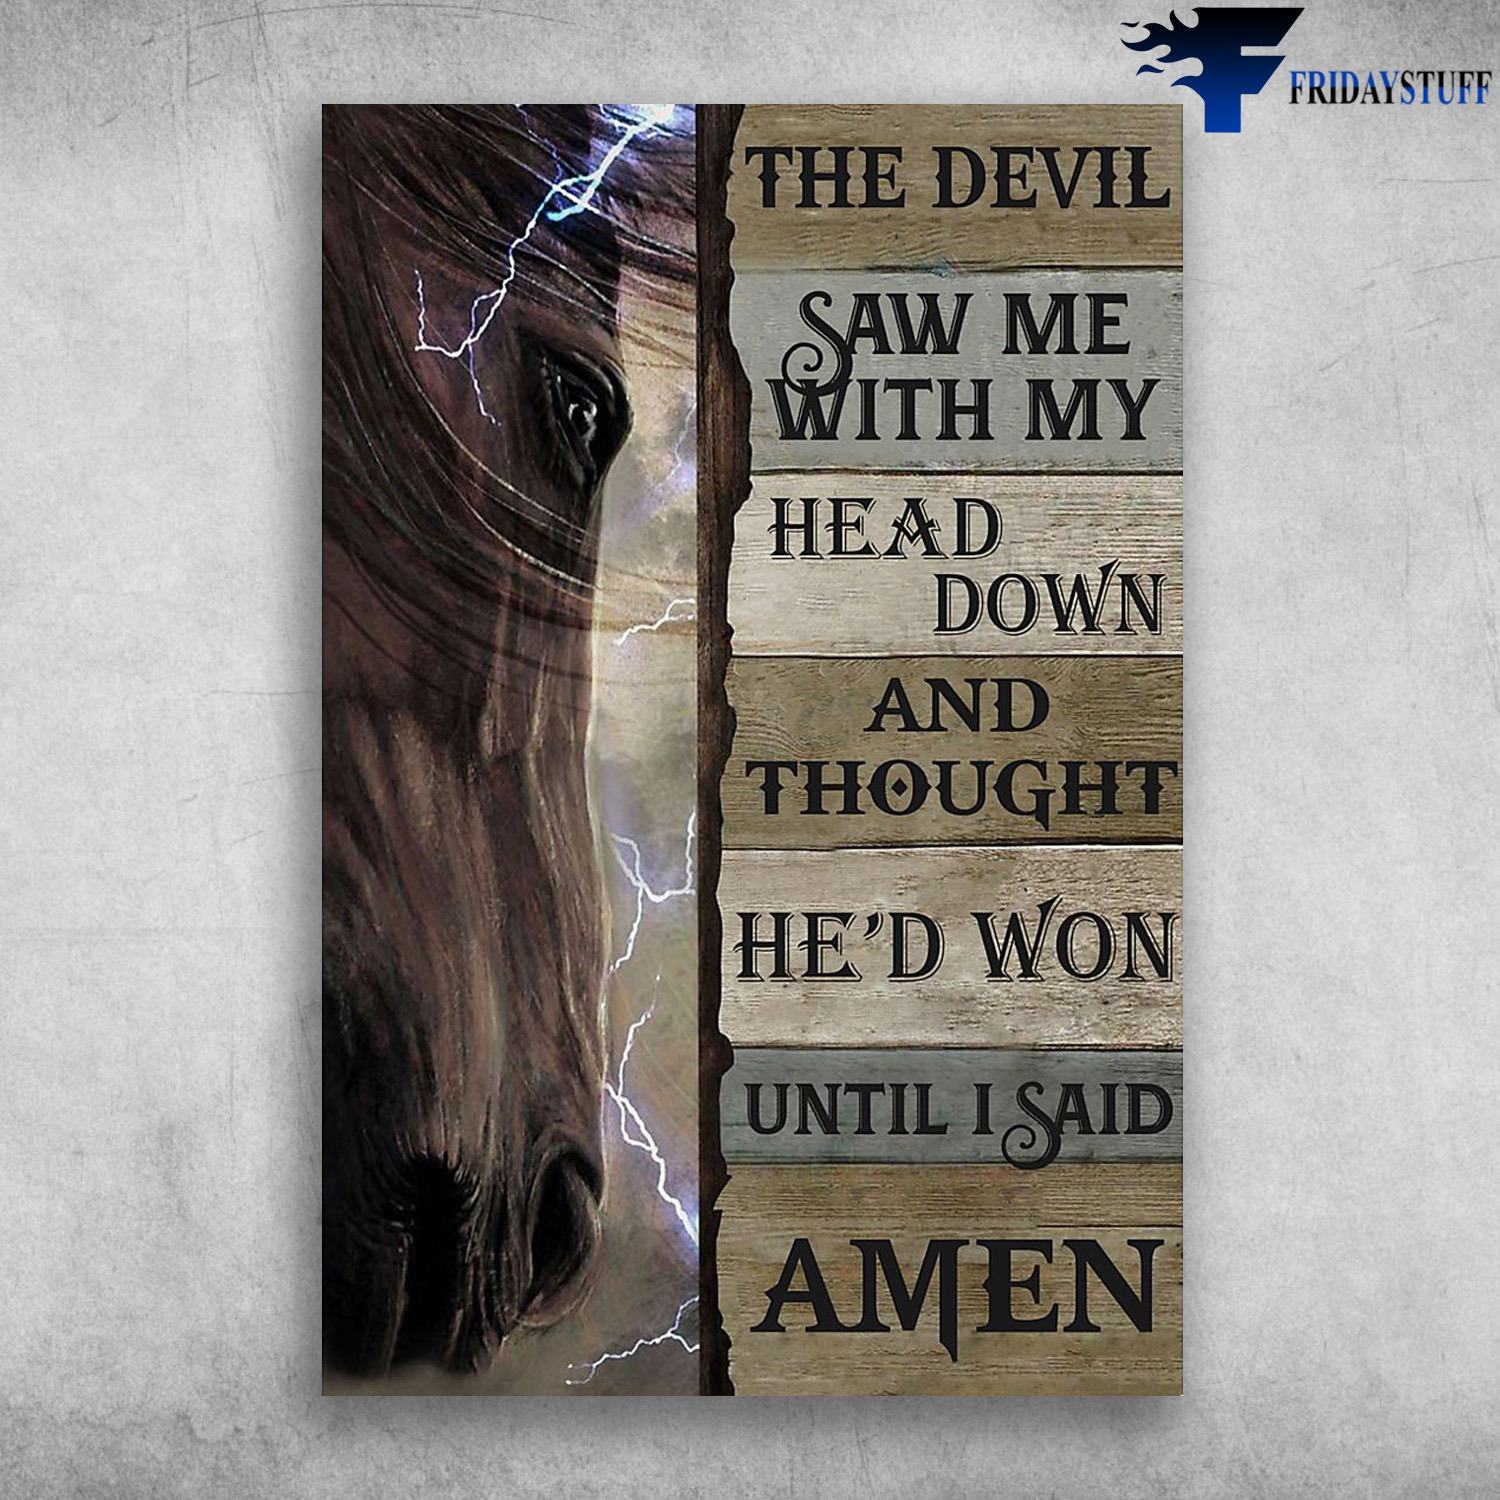 The Horse - The Devil Saw Me With My Head Down And Thought, He'd Won Until I Said Amen